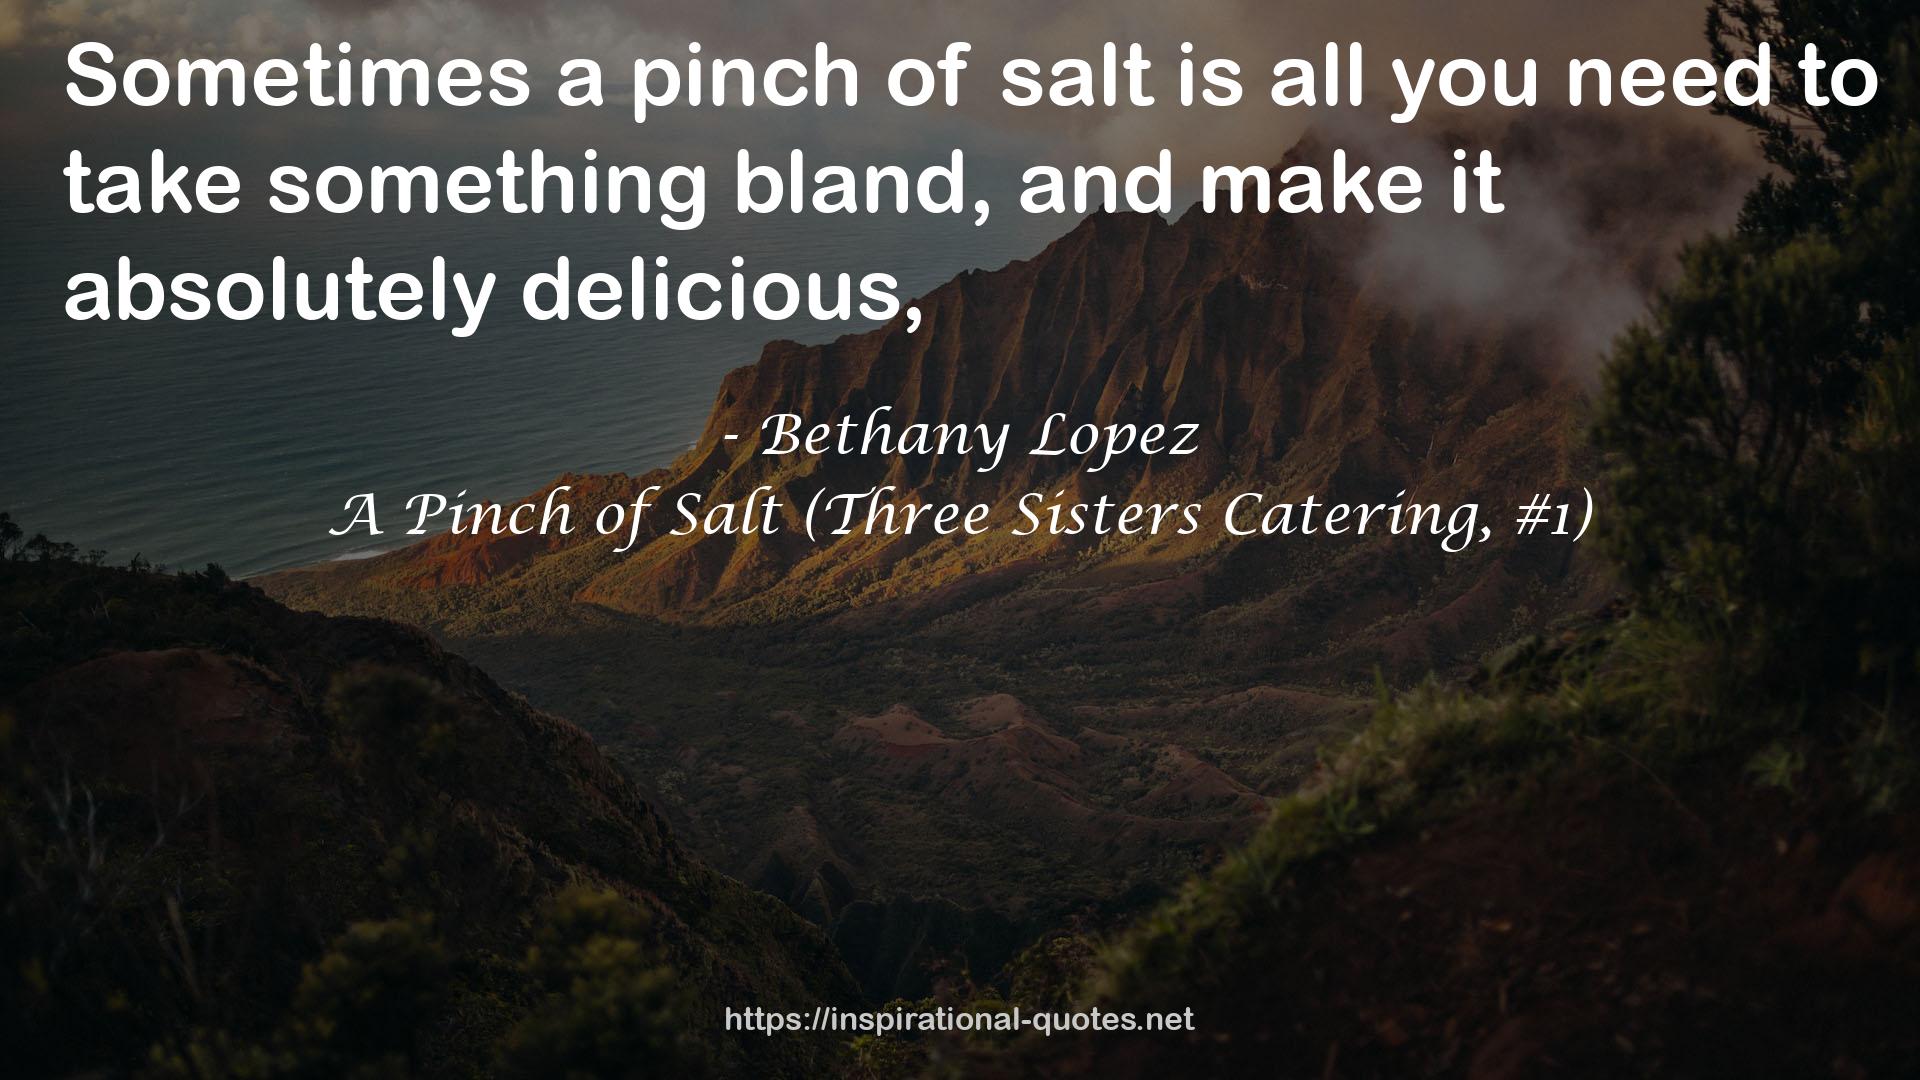 A Pinch of Salt (Three Sisters Catering, #1) QUOTES